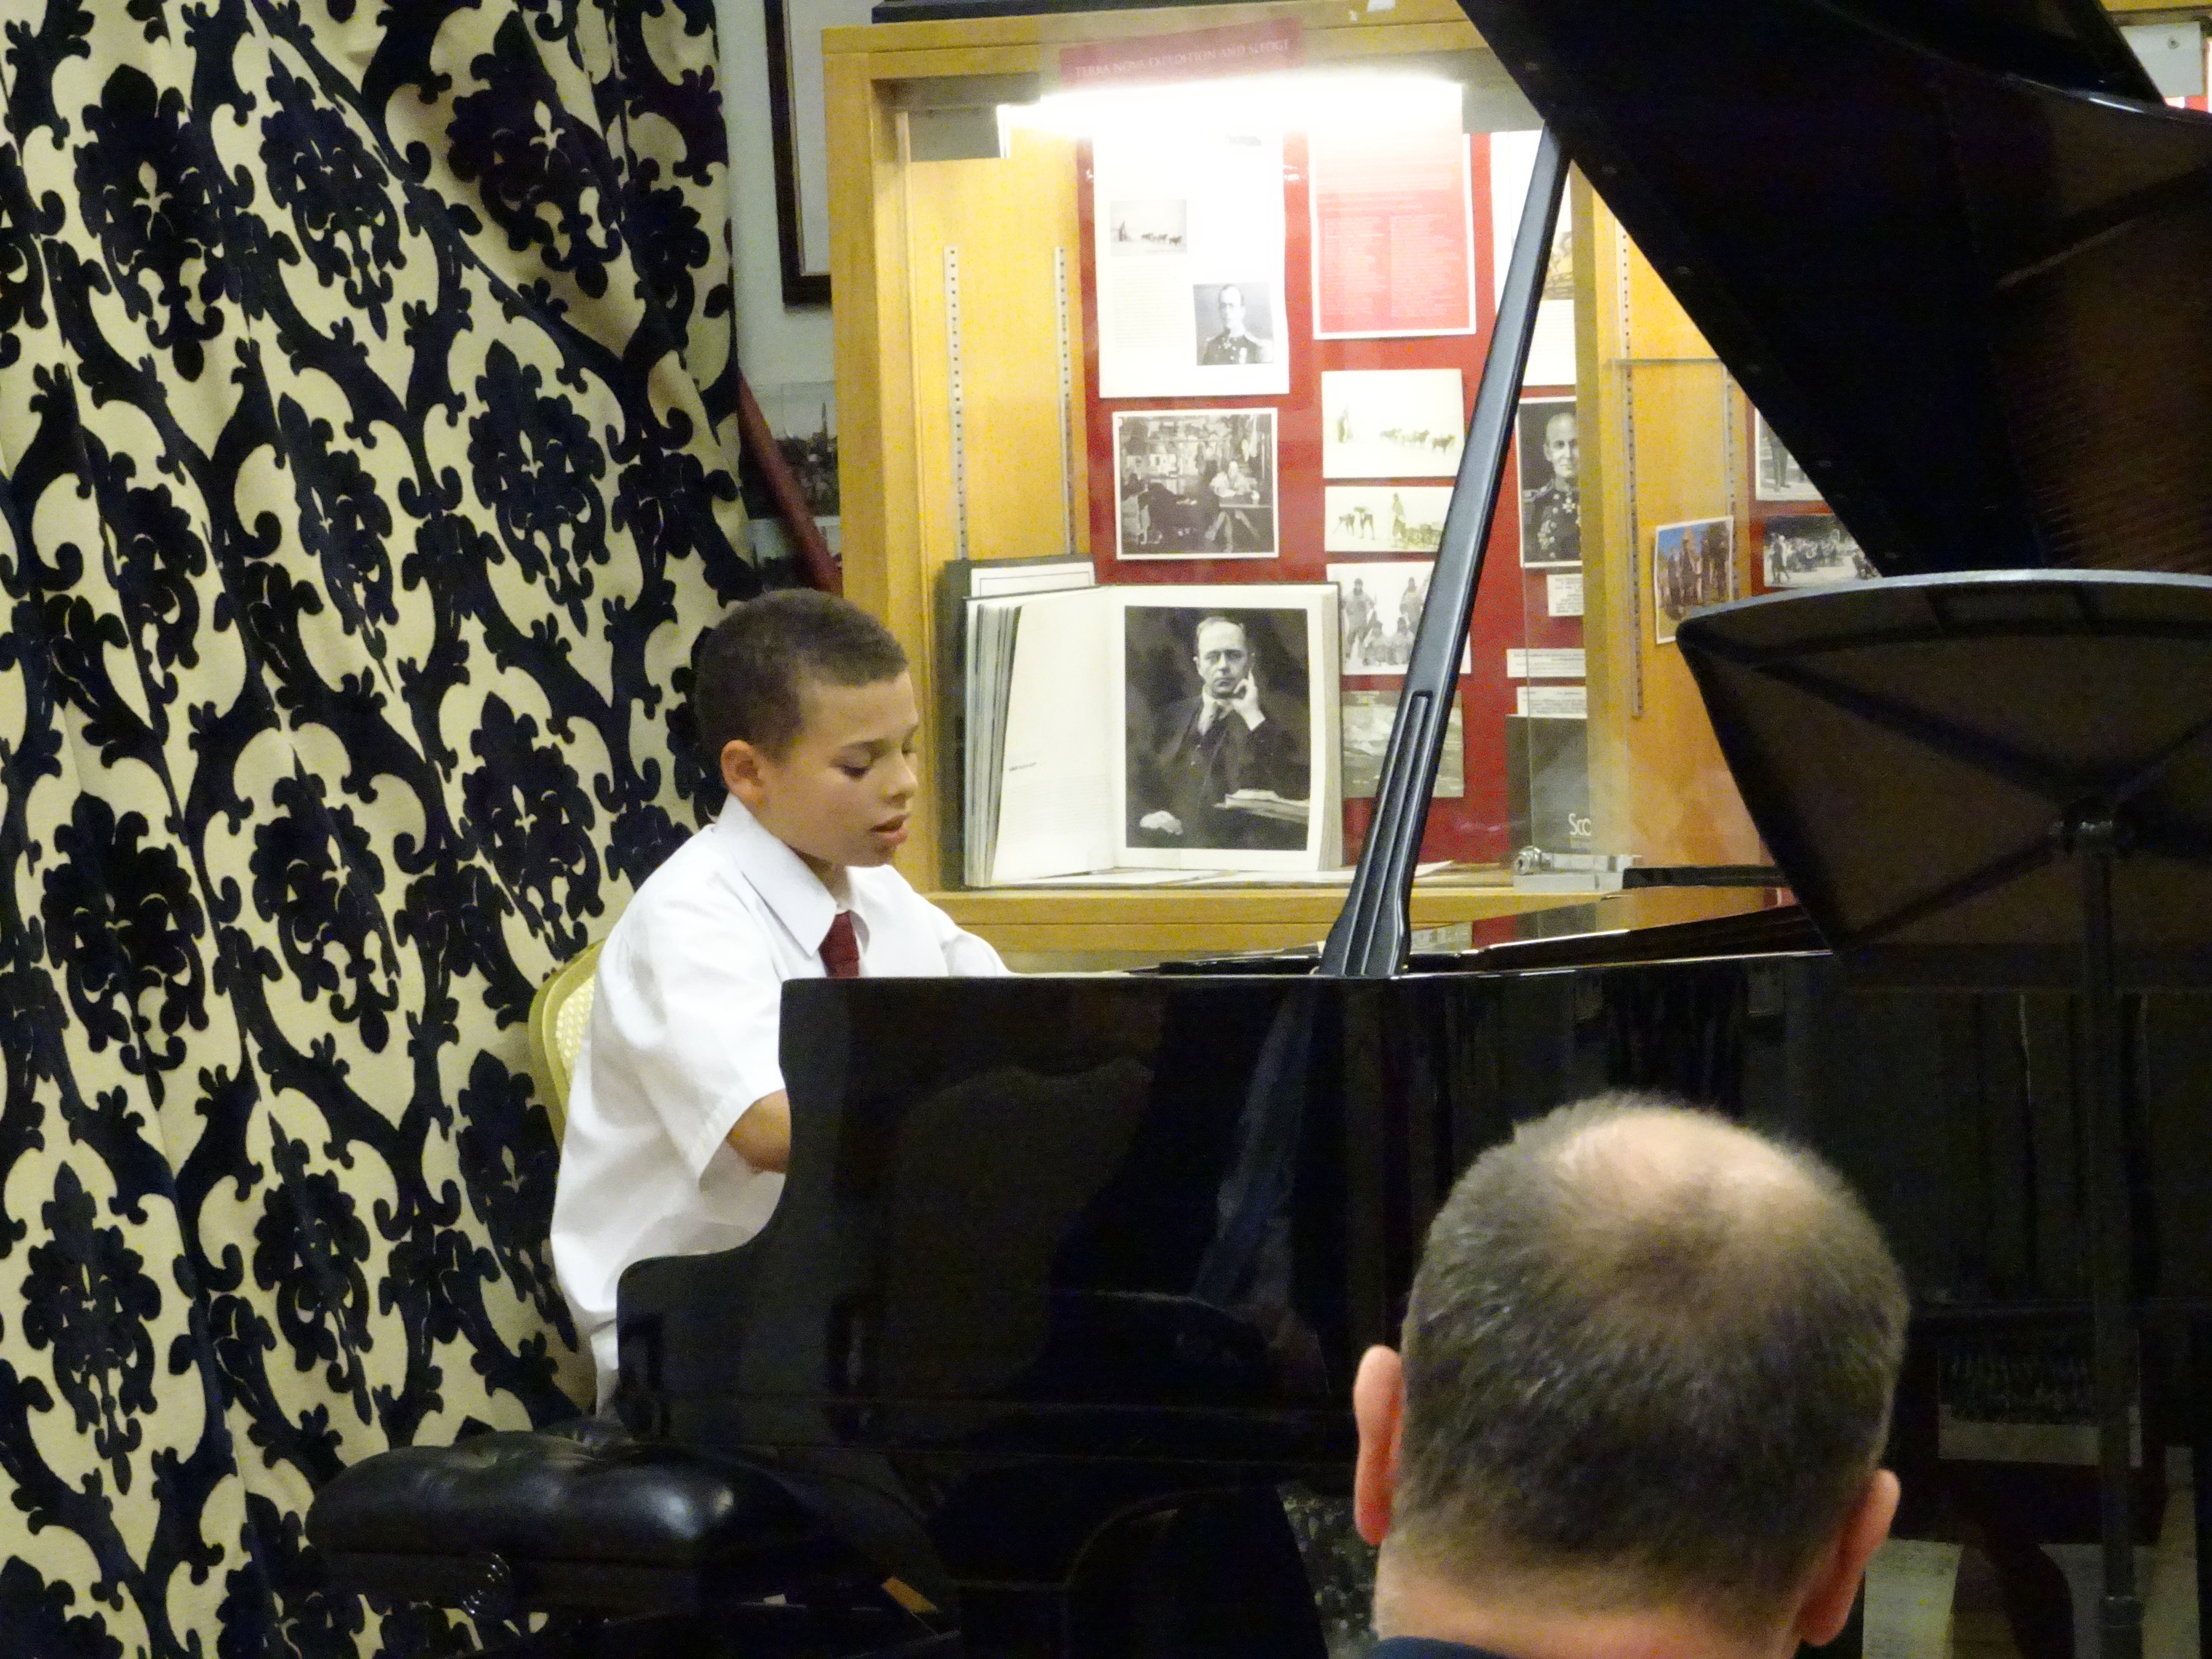 Early Evening Concert, 8th October 2015 - Jude W on Piano